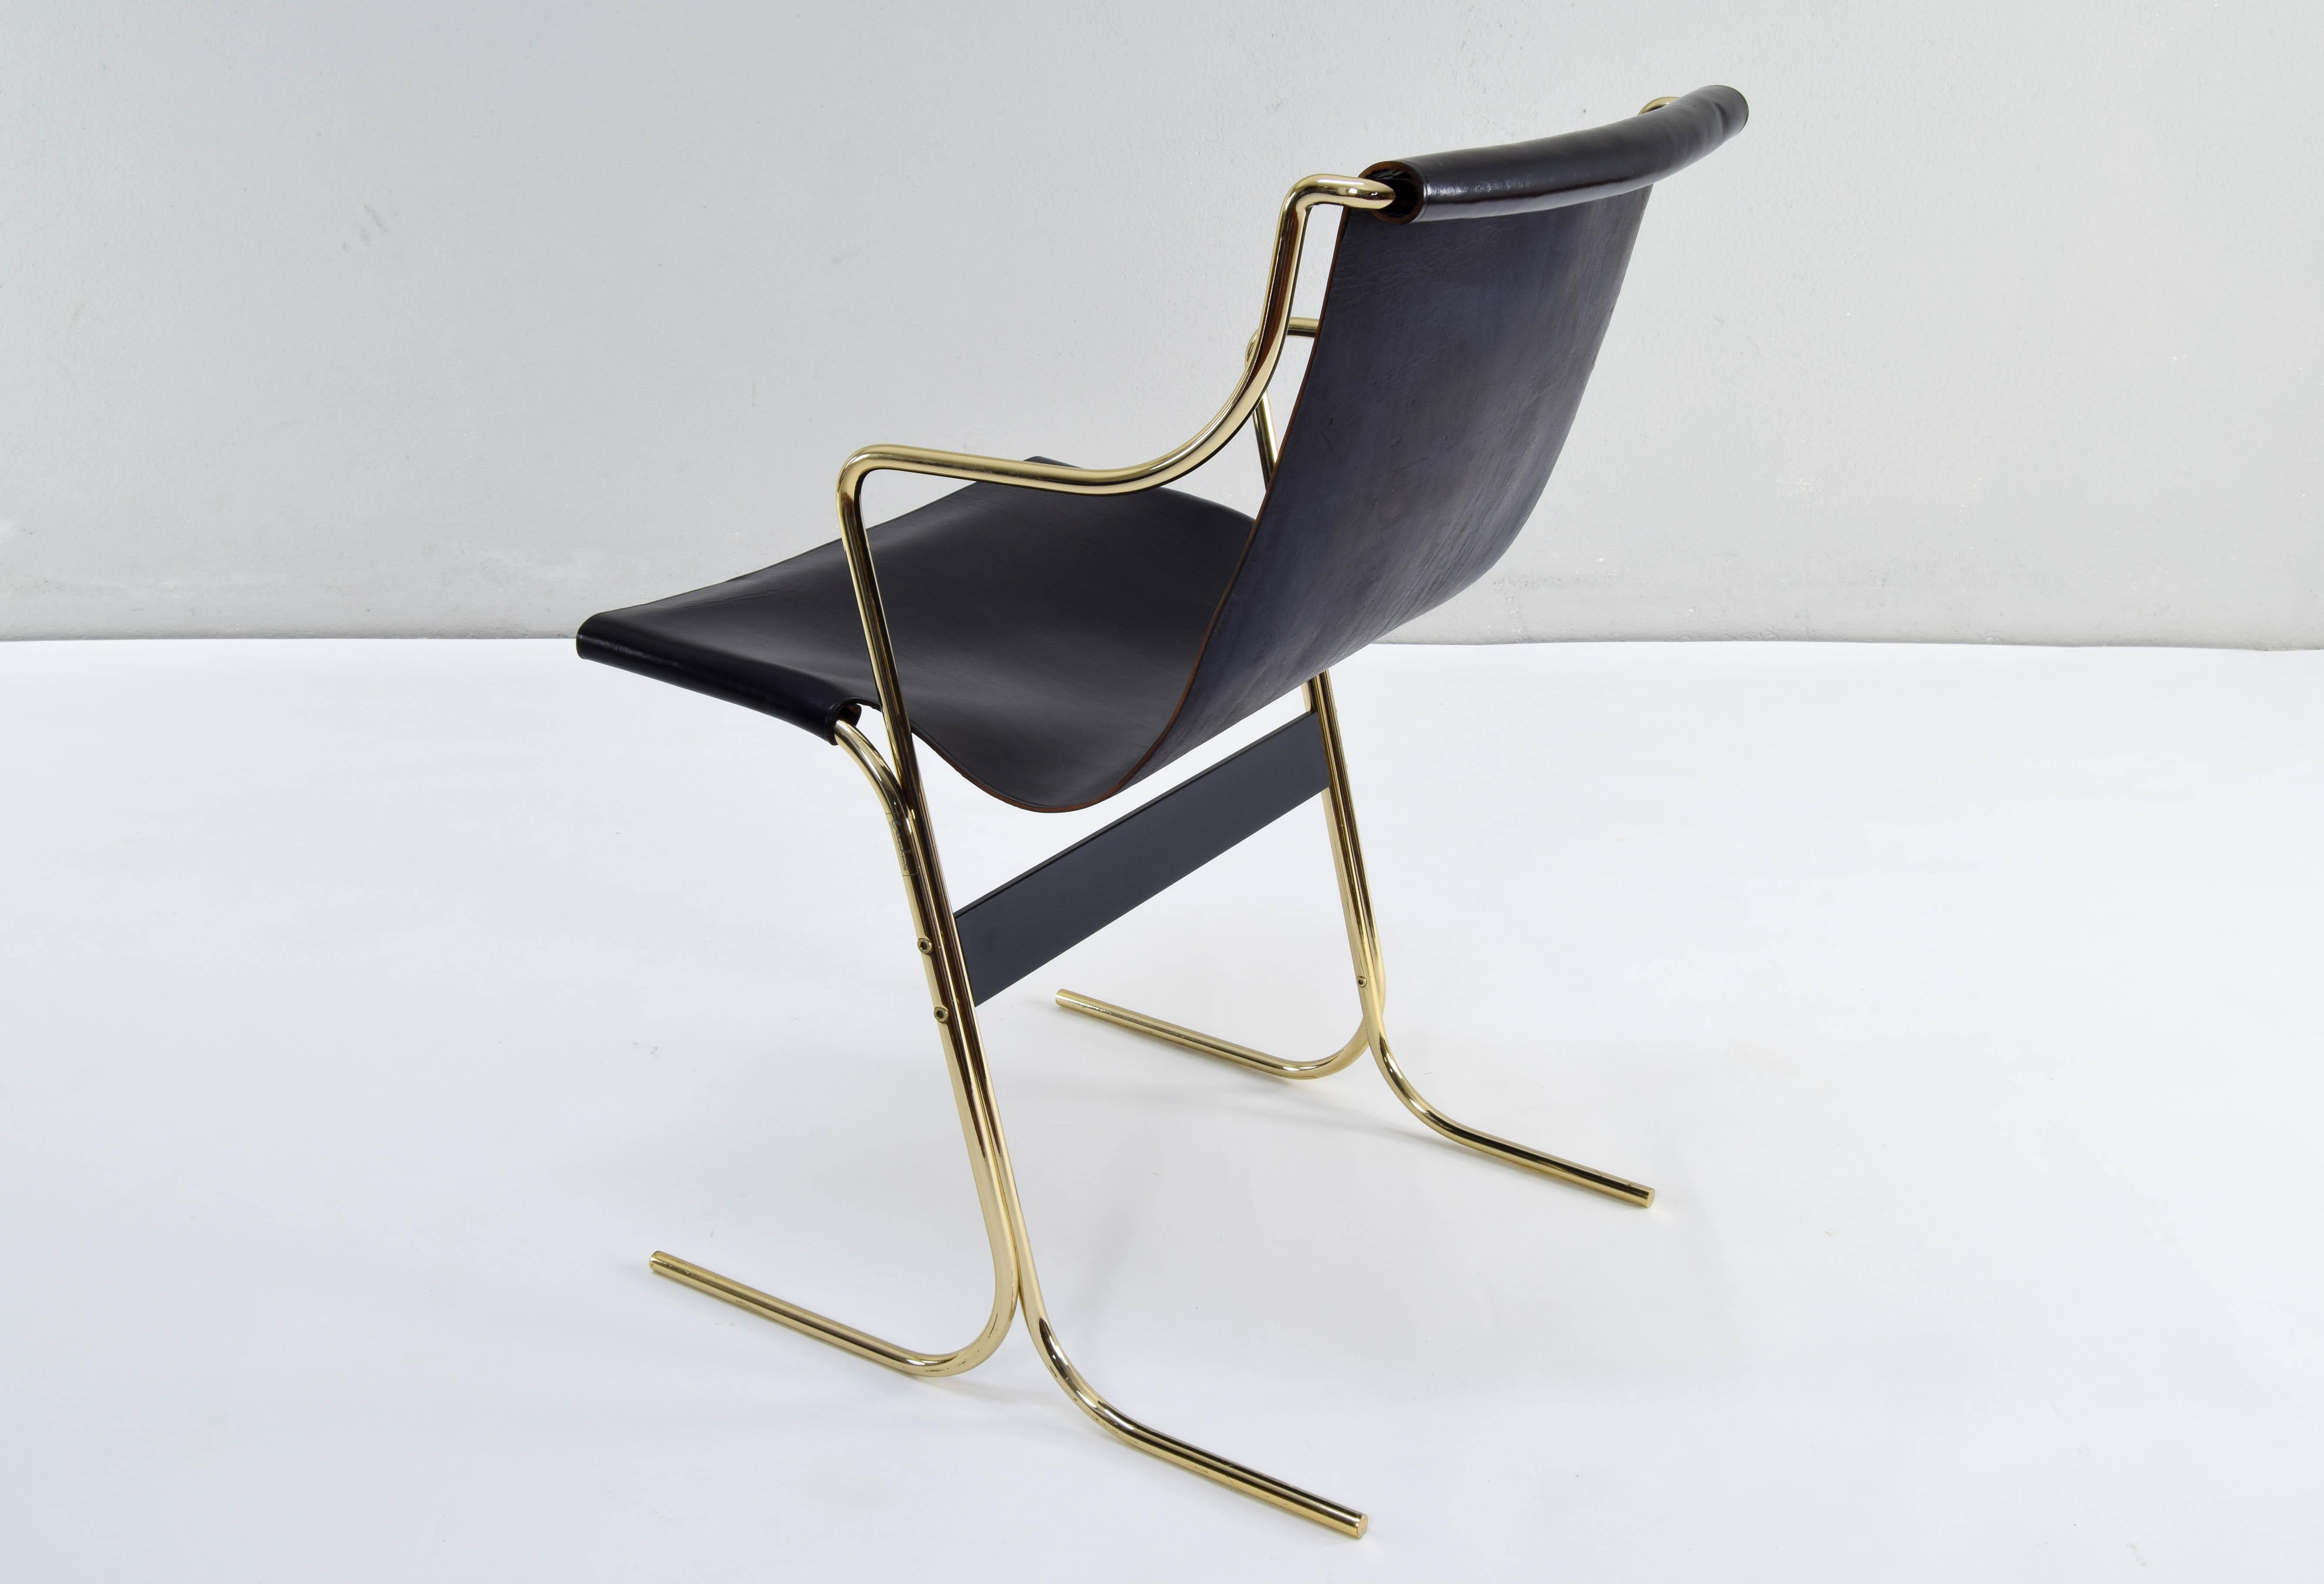 Pair of Leather and Brass Cigno Chairs by Ross Littell and Kelly to Padova Italy 2